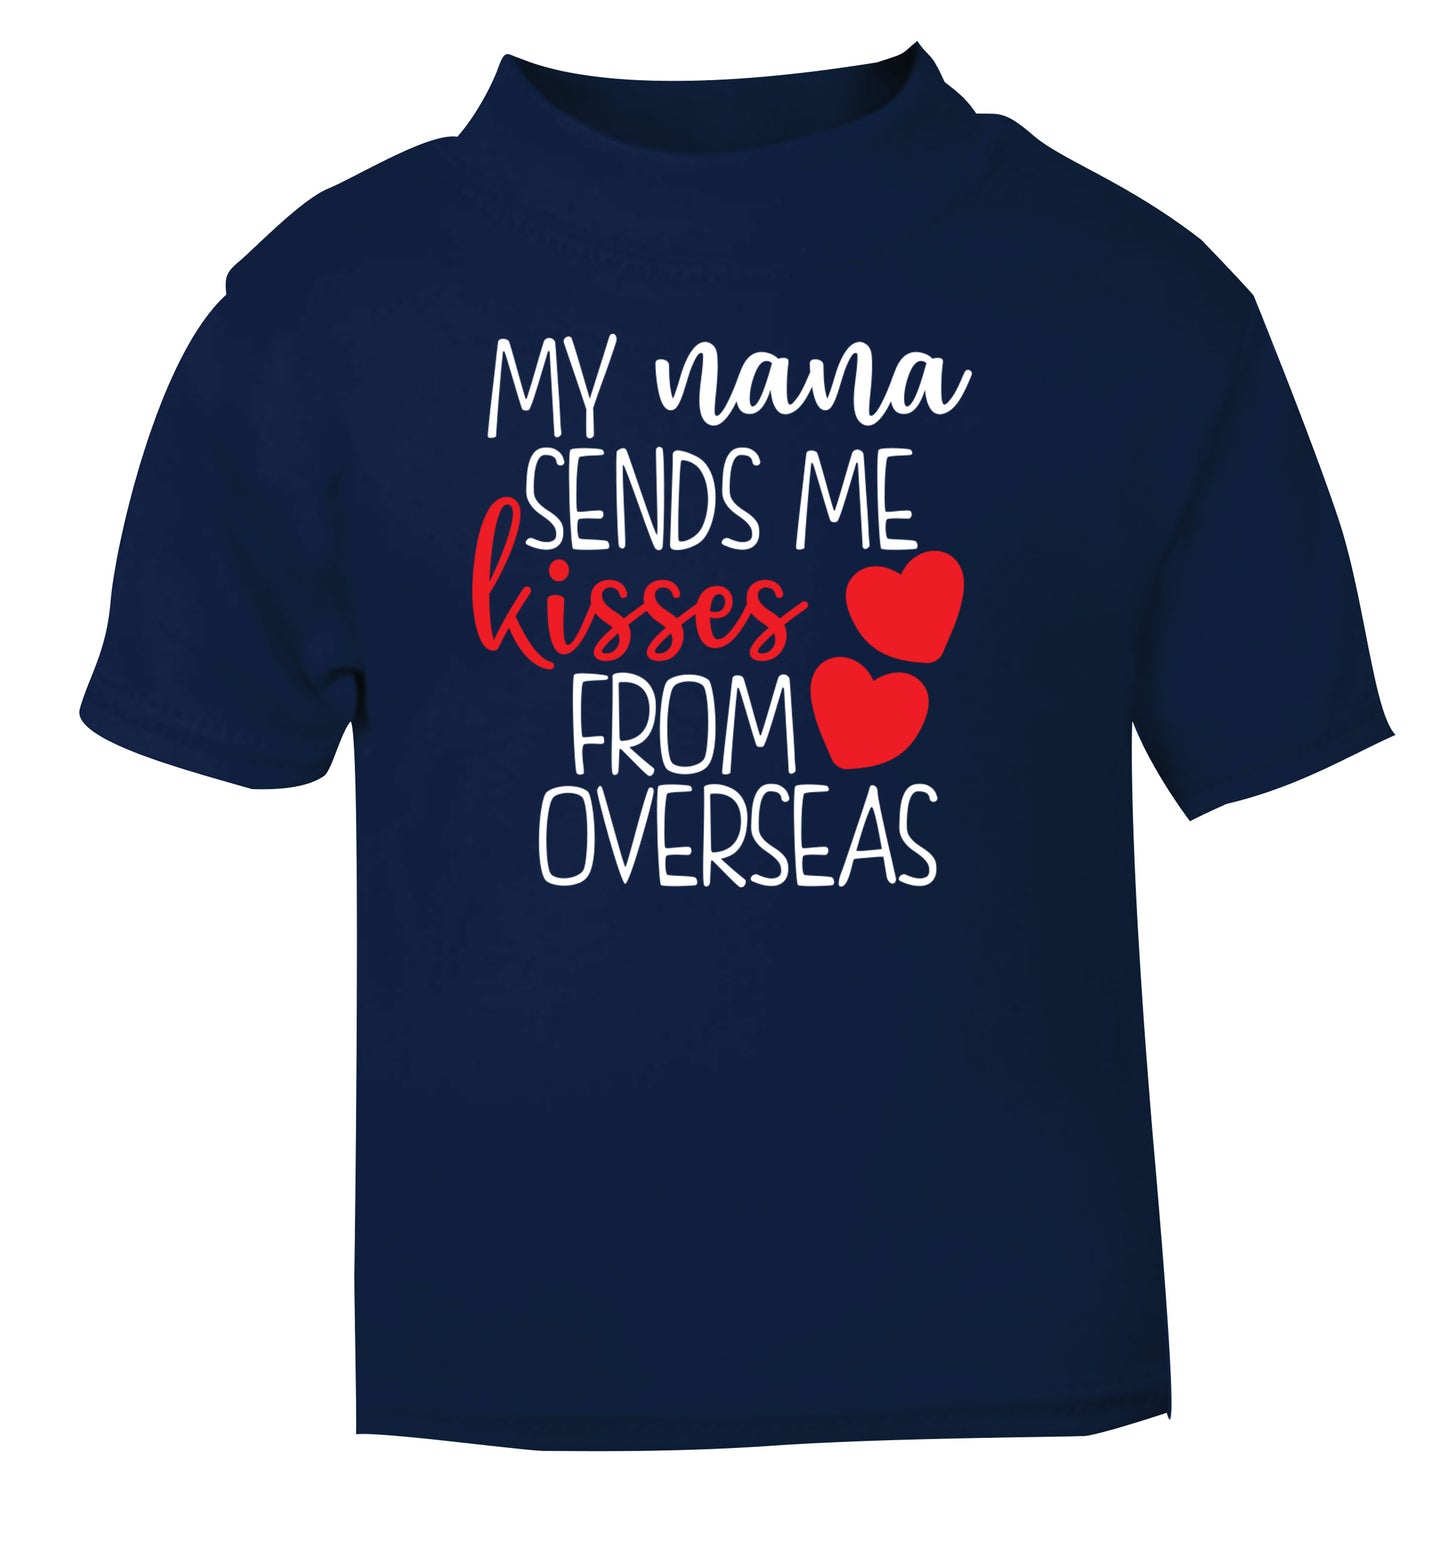 My nana sends me kisses from overseas navy Baby Toddler Tshirt 2 Years